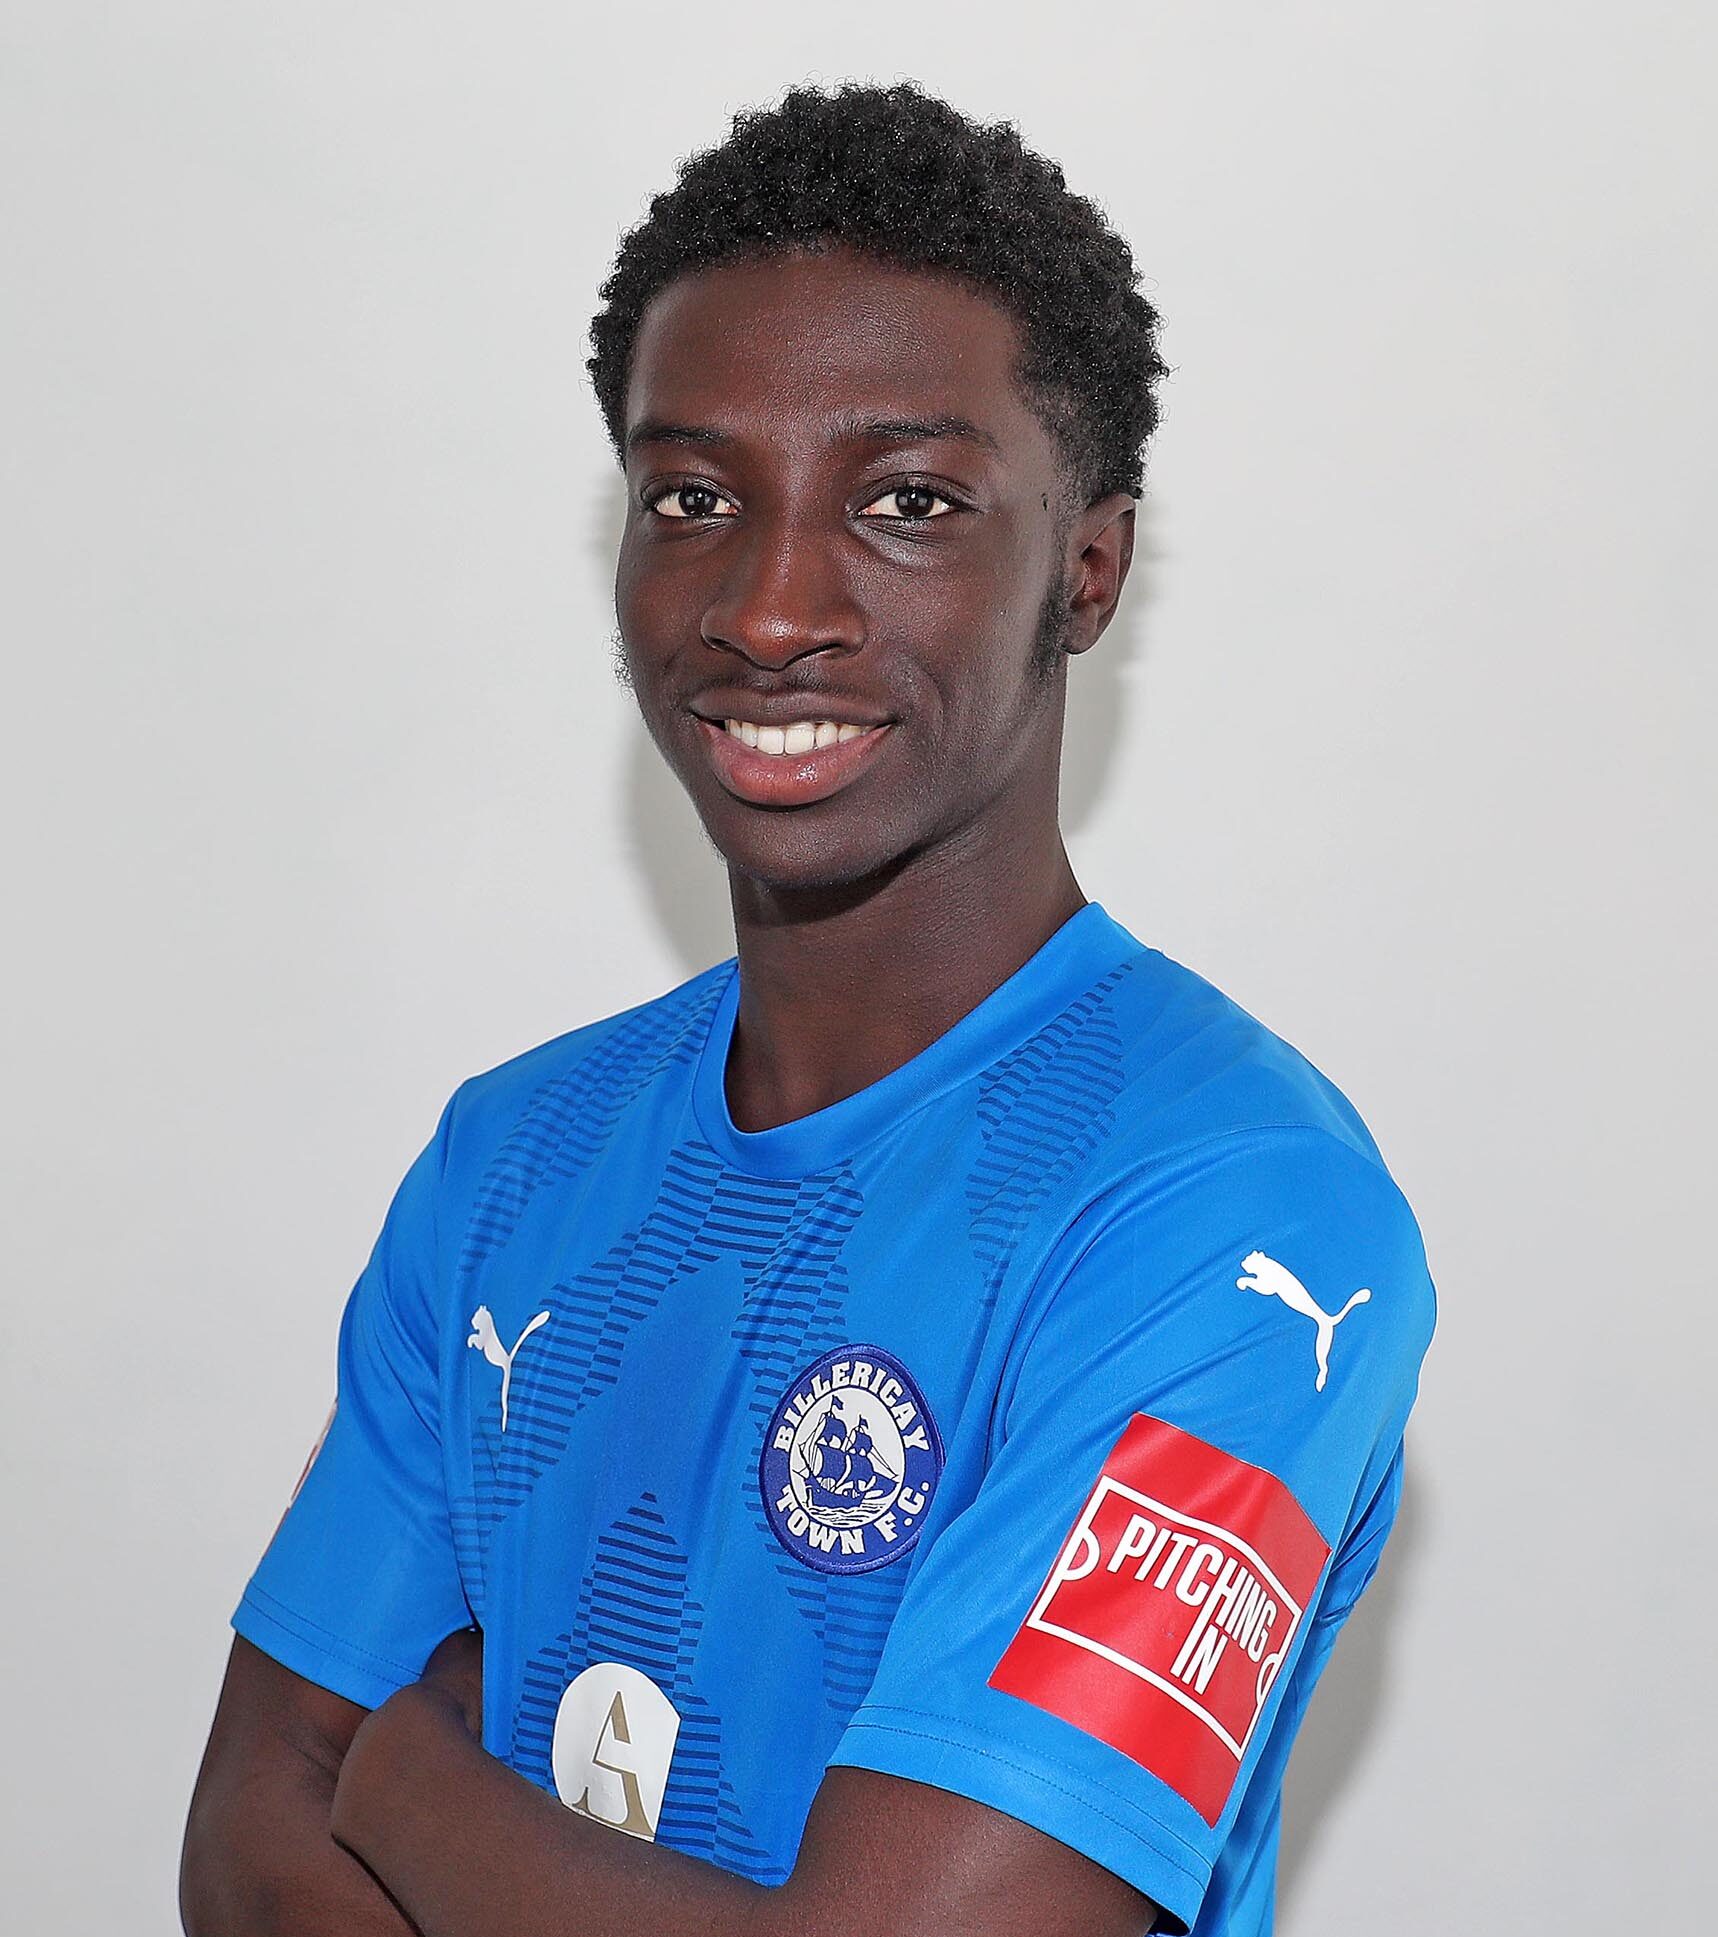 Richard Asamoah signs for Billericay Town FC